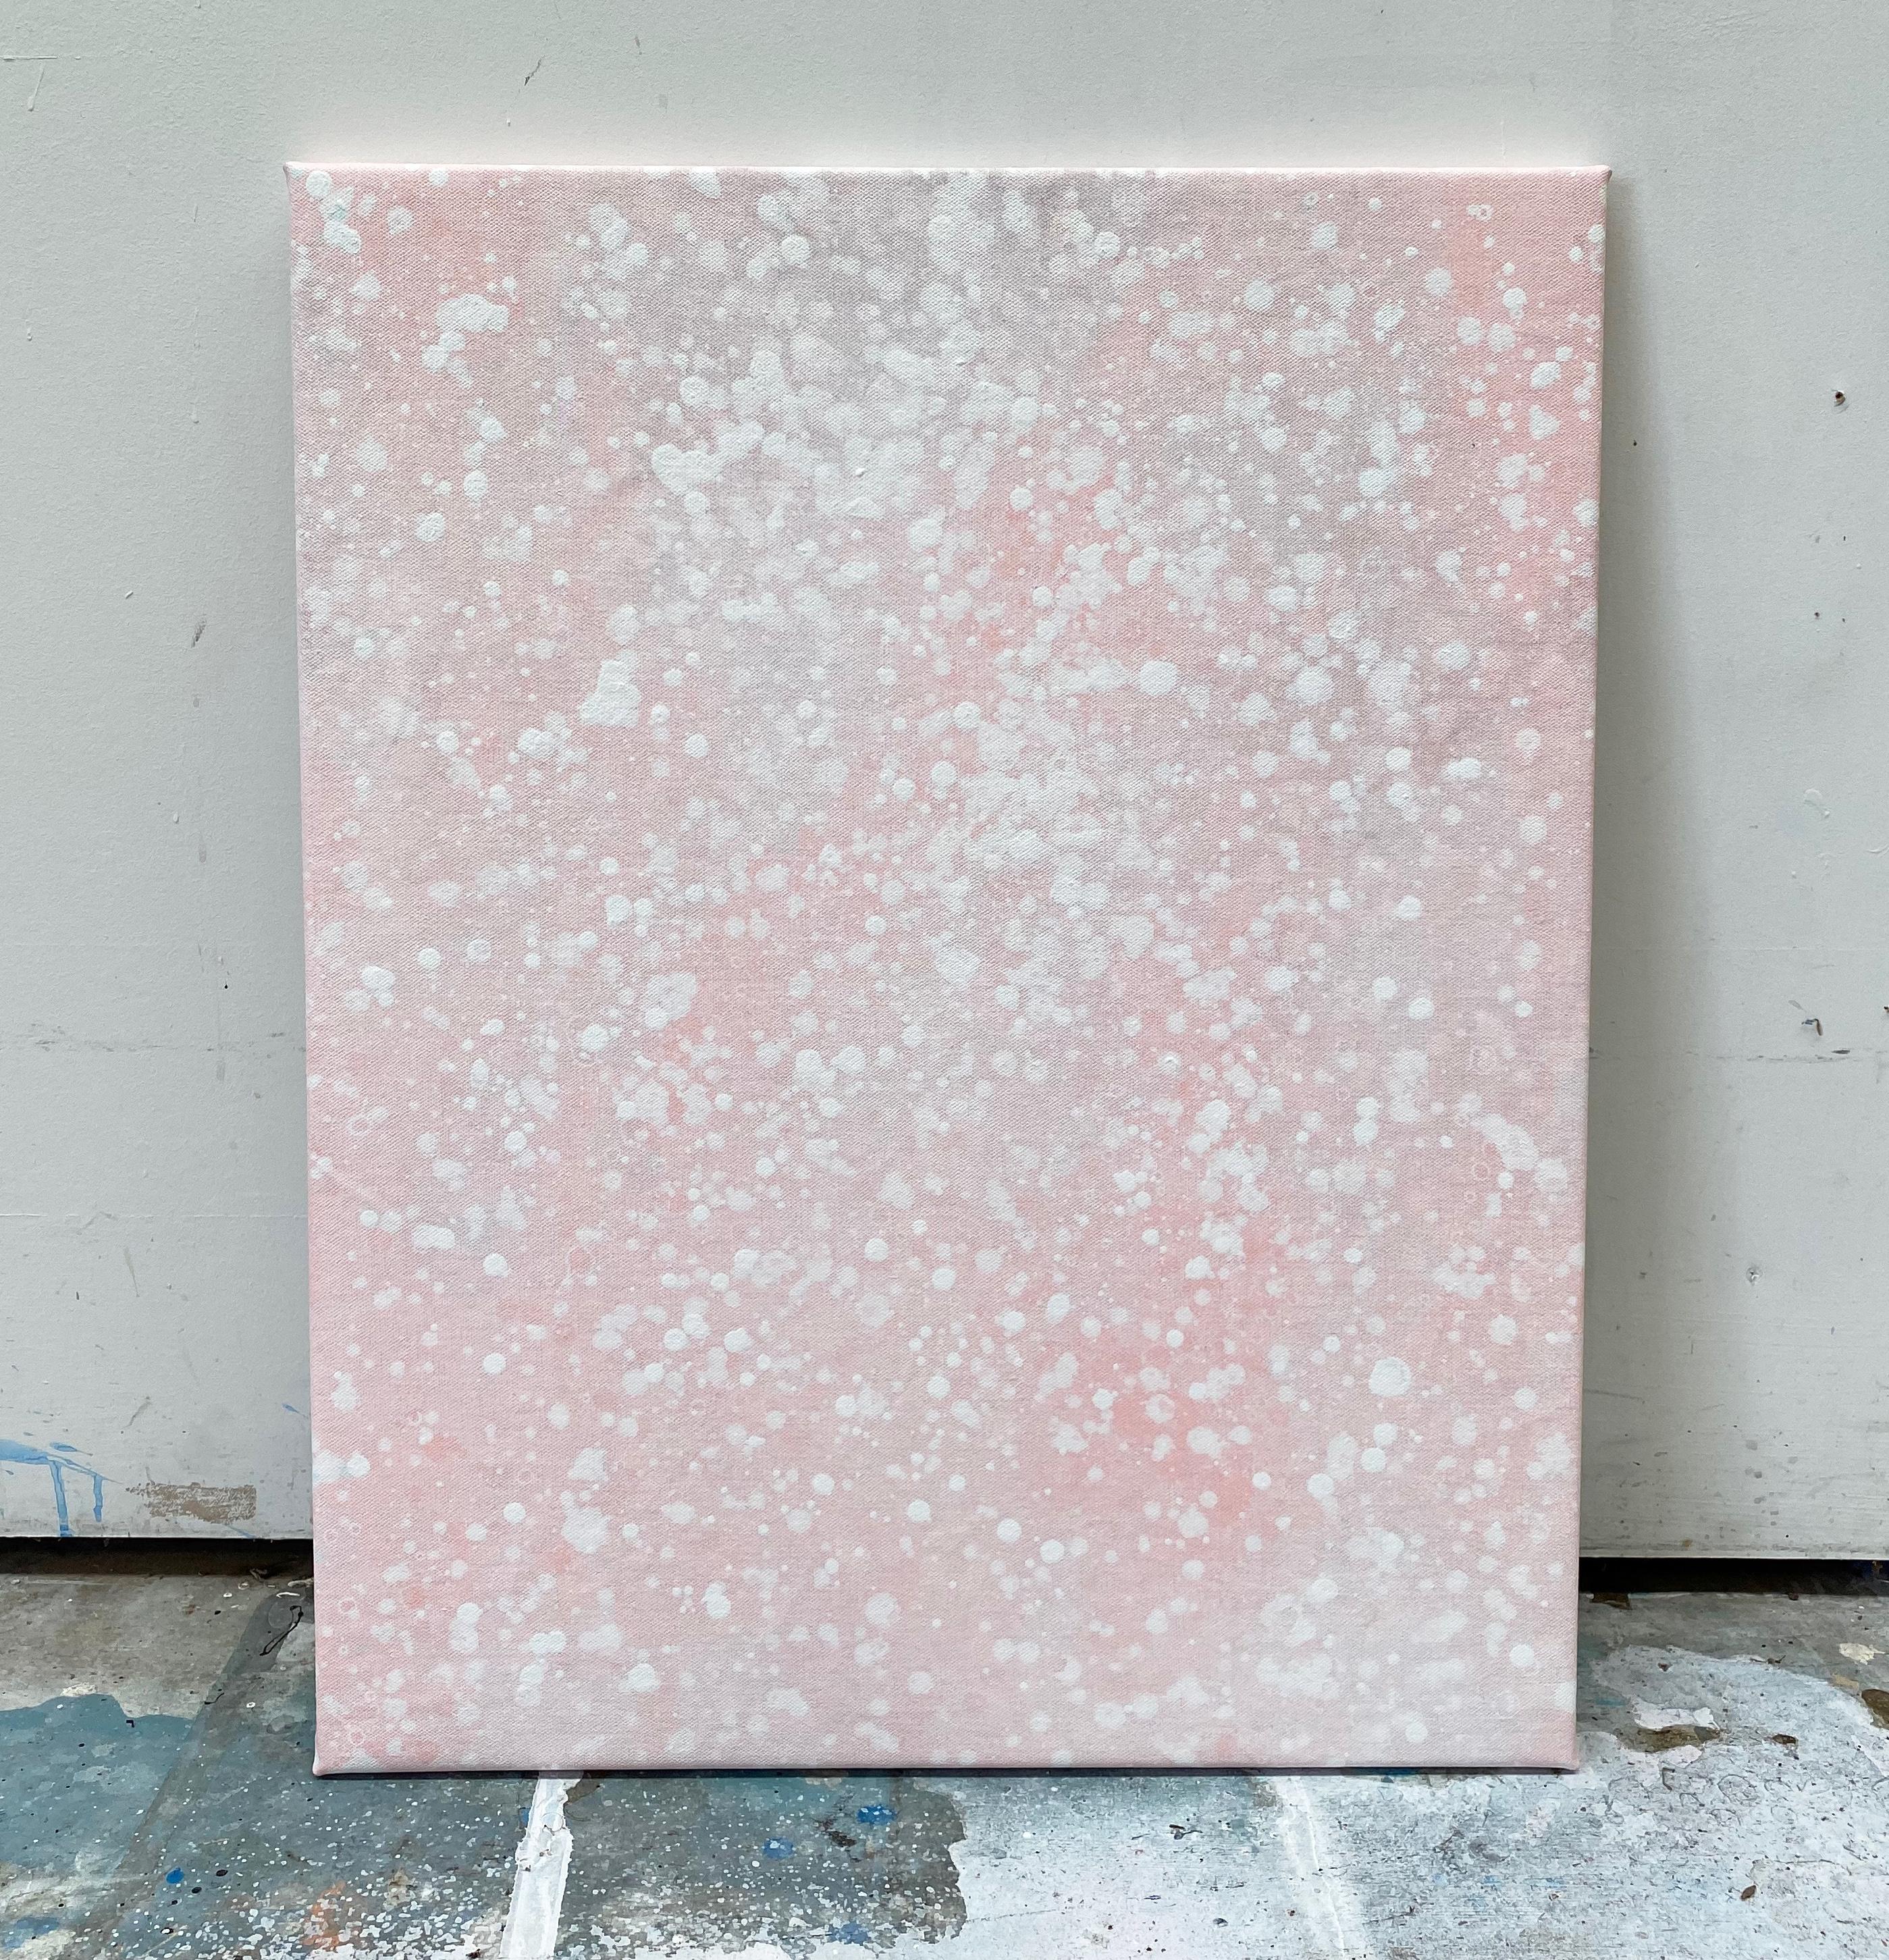 Its snowing pastel light pink dot abstract minimal expressionist modern painting - Painting by Kathleen Rhee